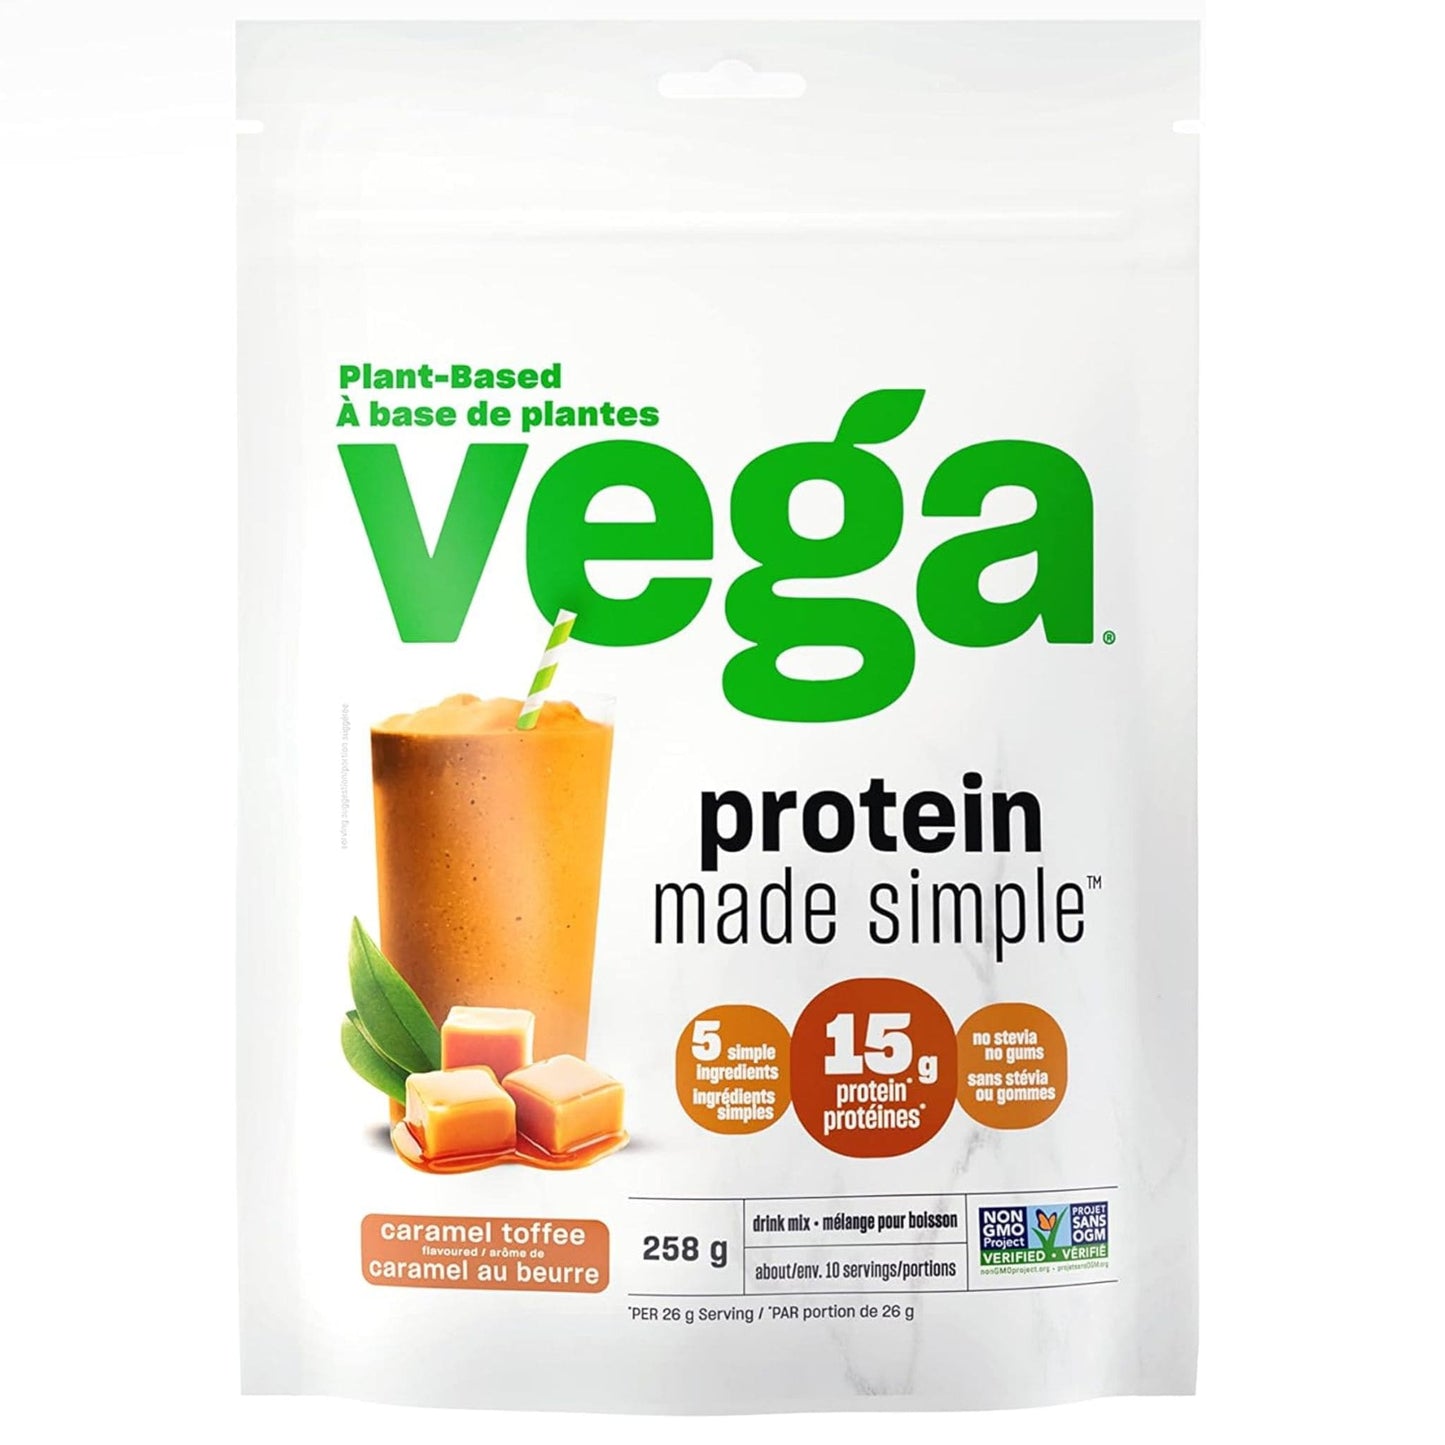 Caramel Toffee | Vega Protein Made Simple // caramel toffee flavour